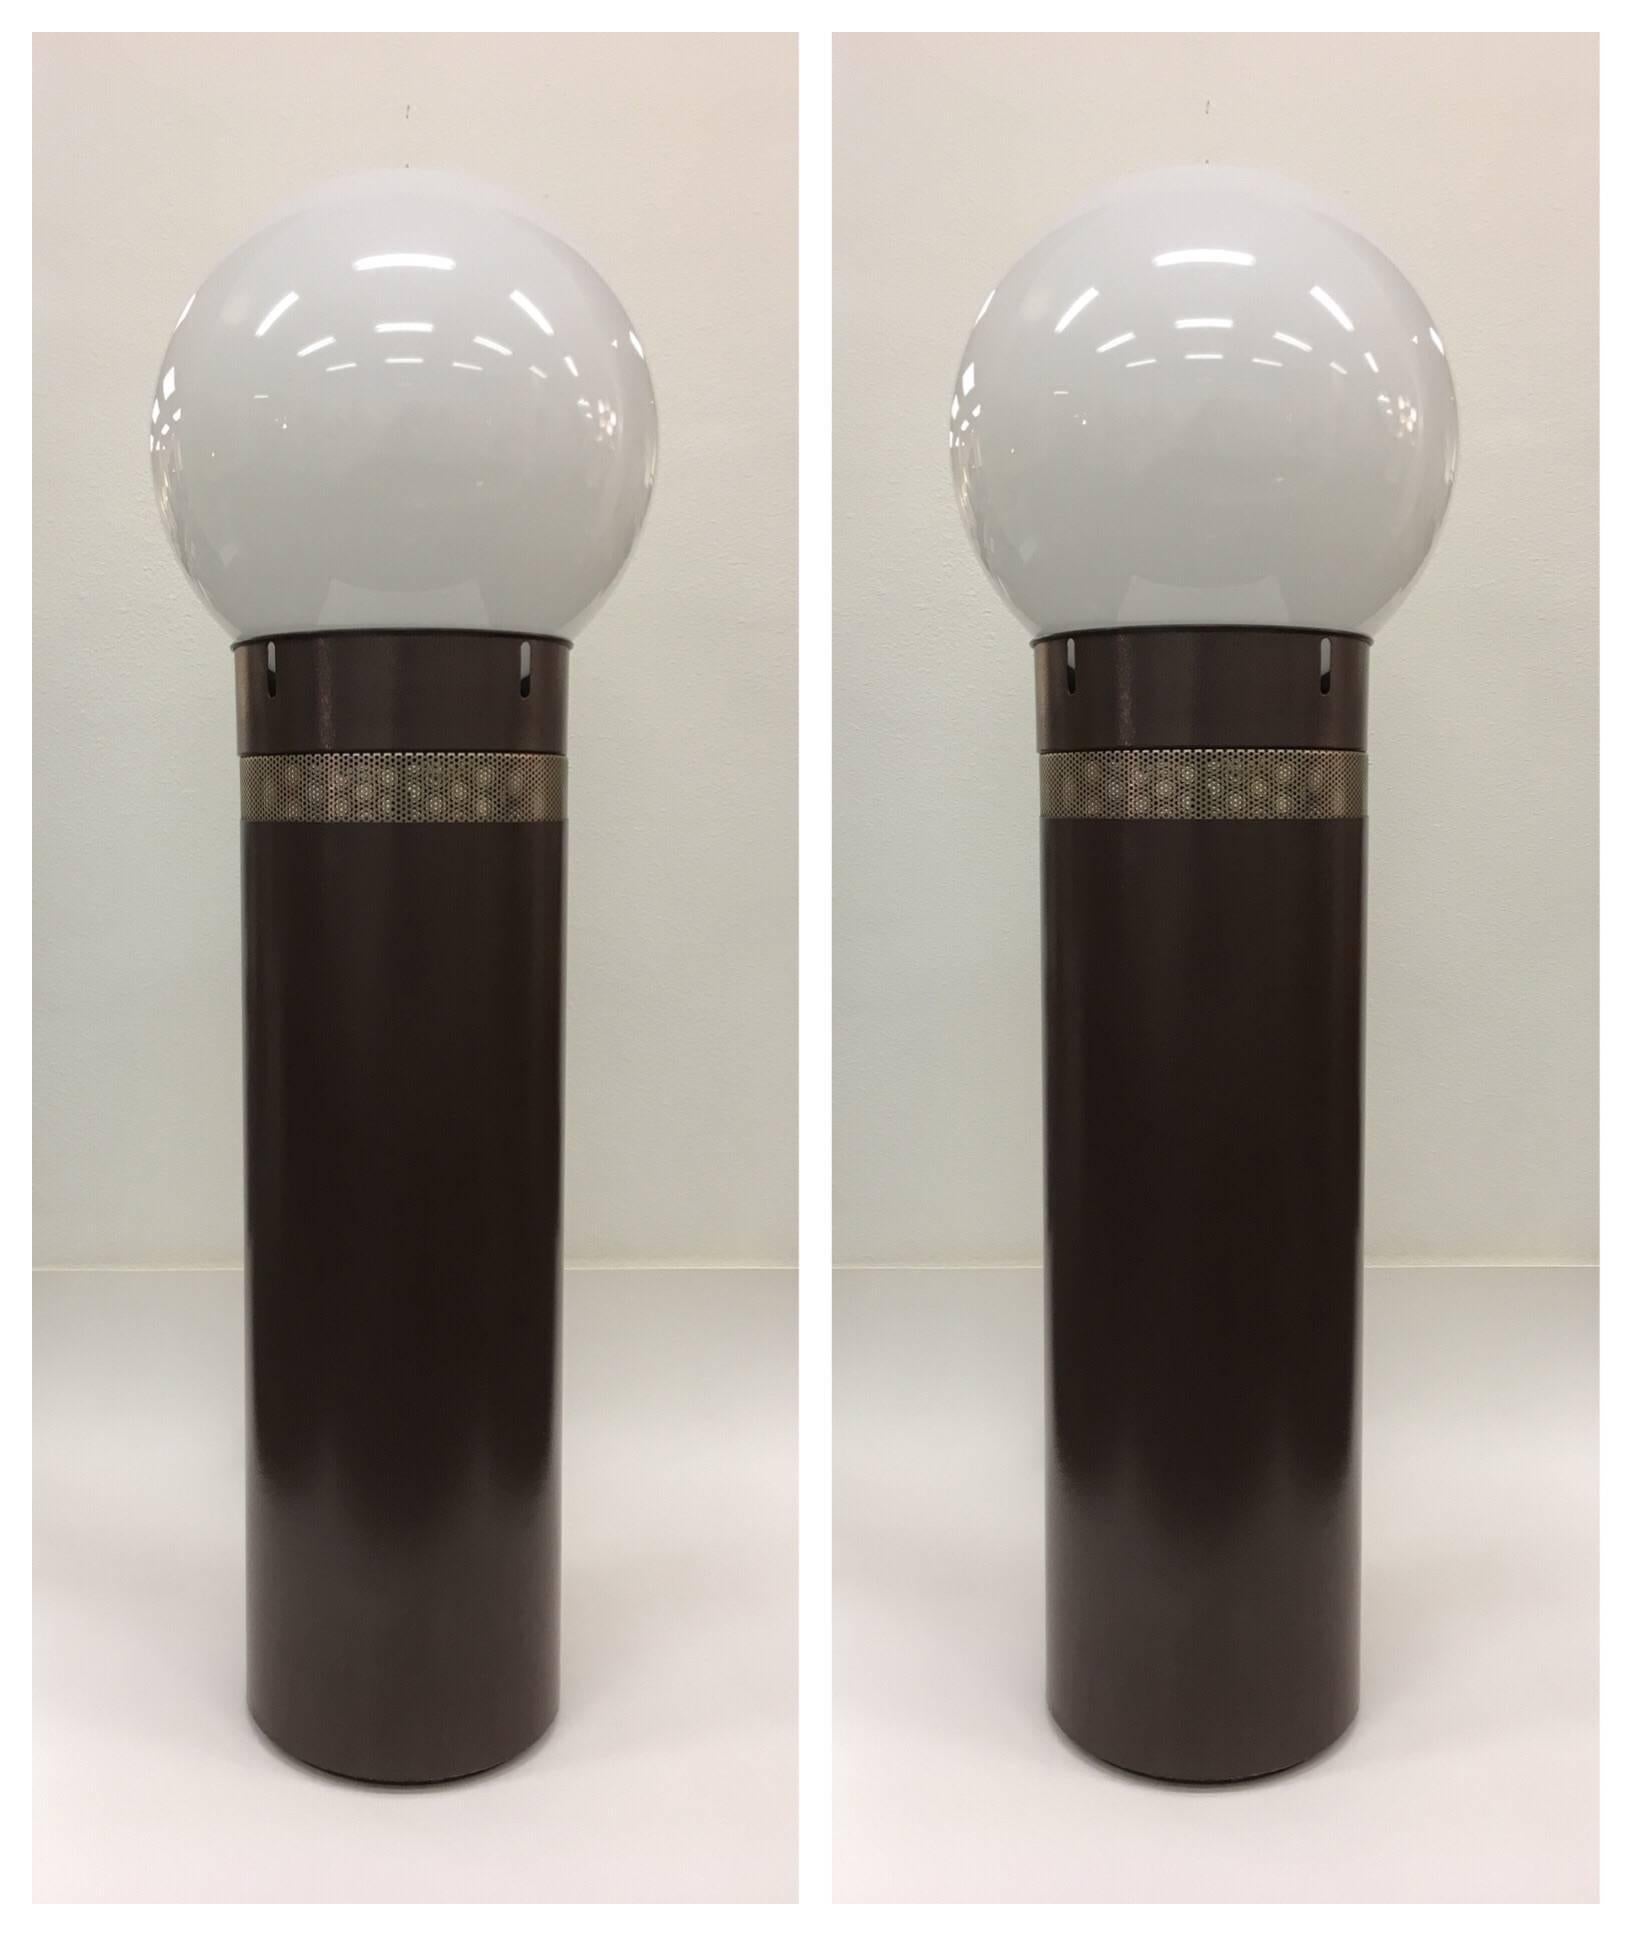 A spectacular pair of chocolate brown and white glass globes 